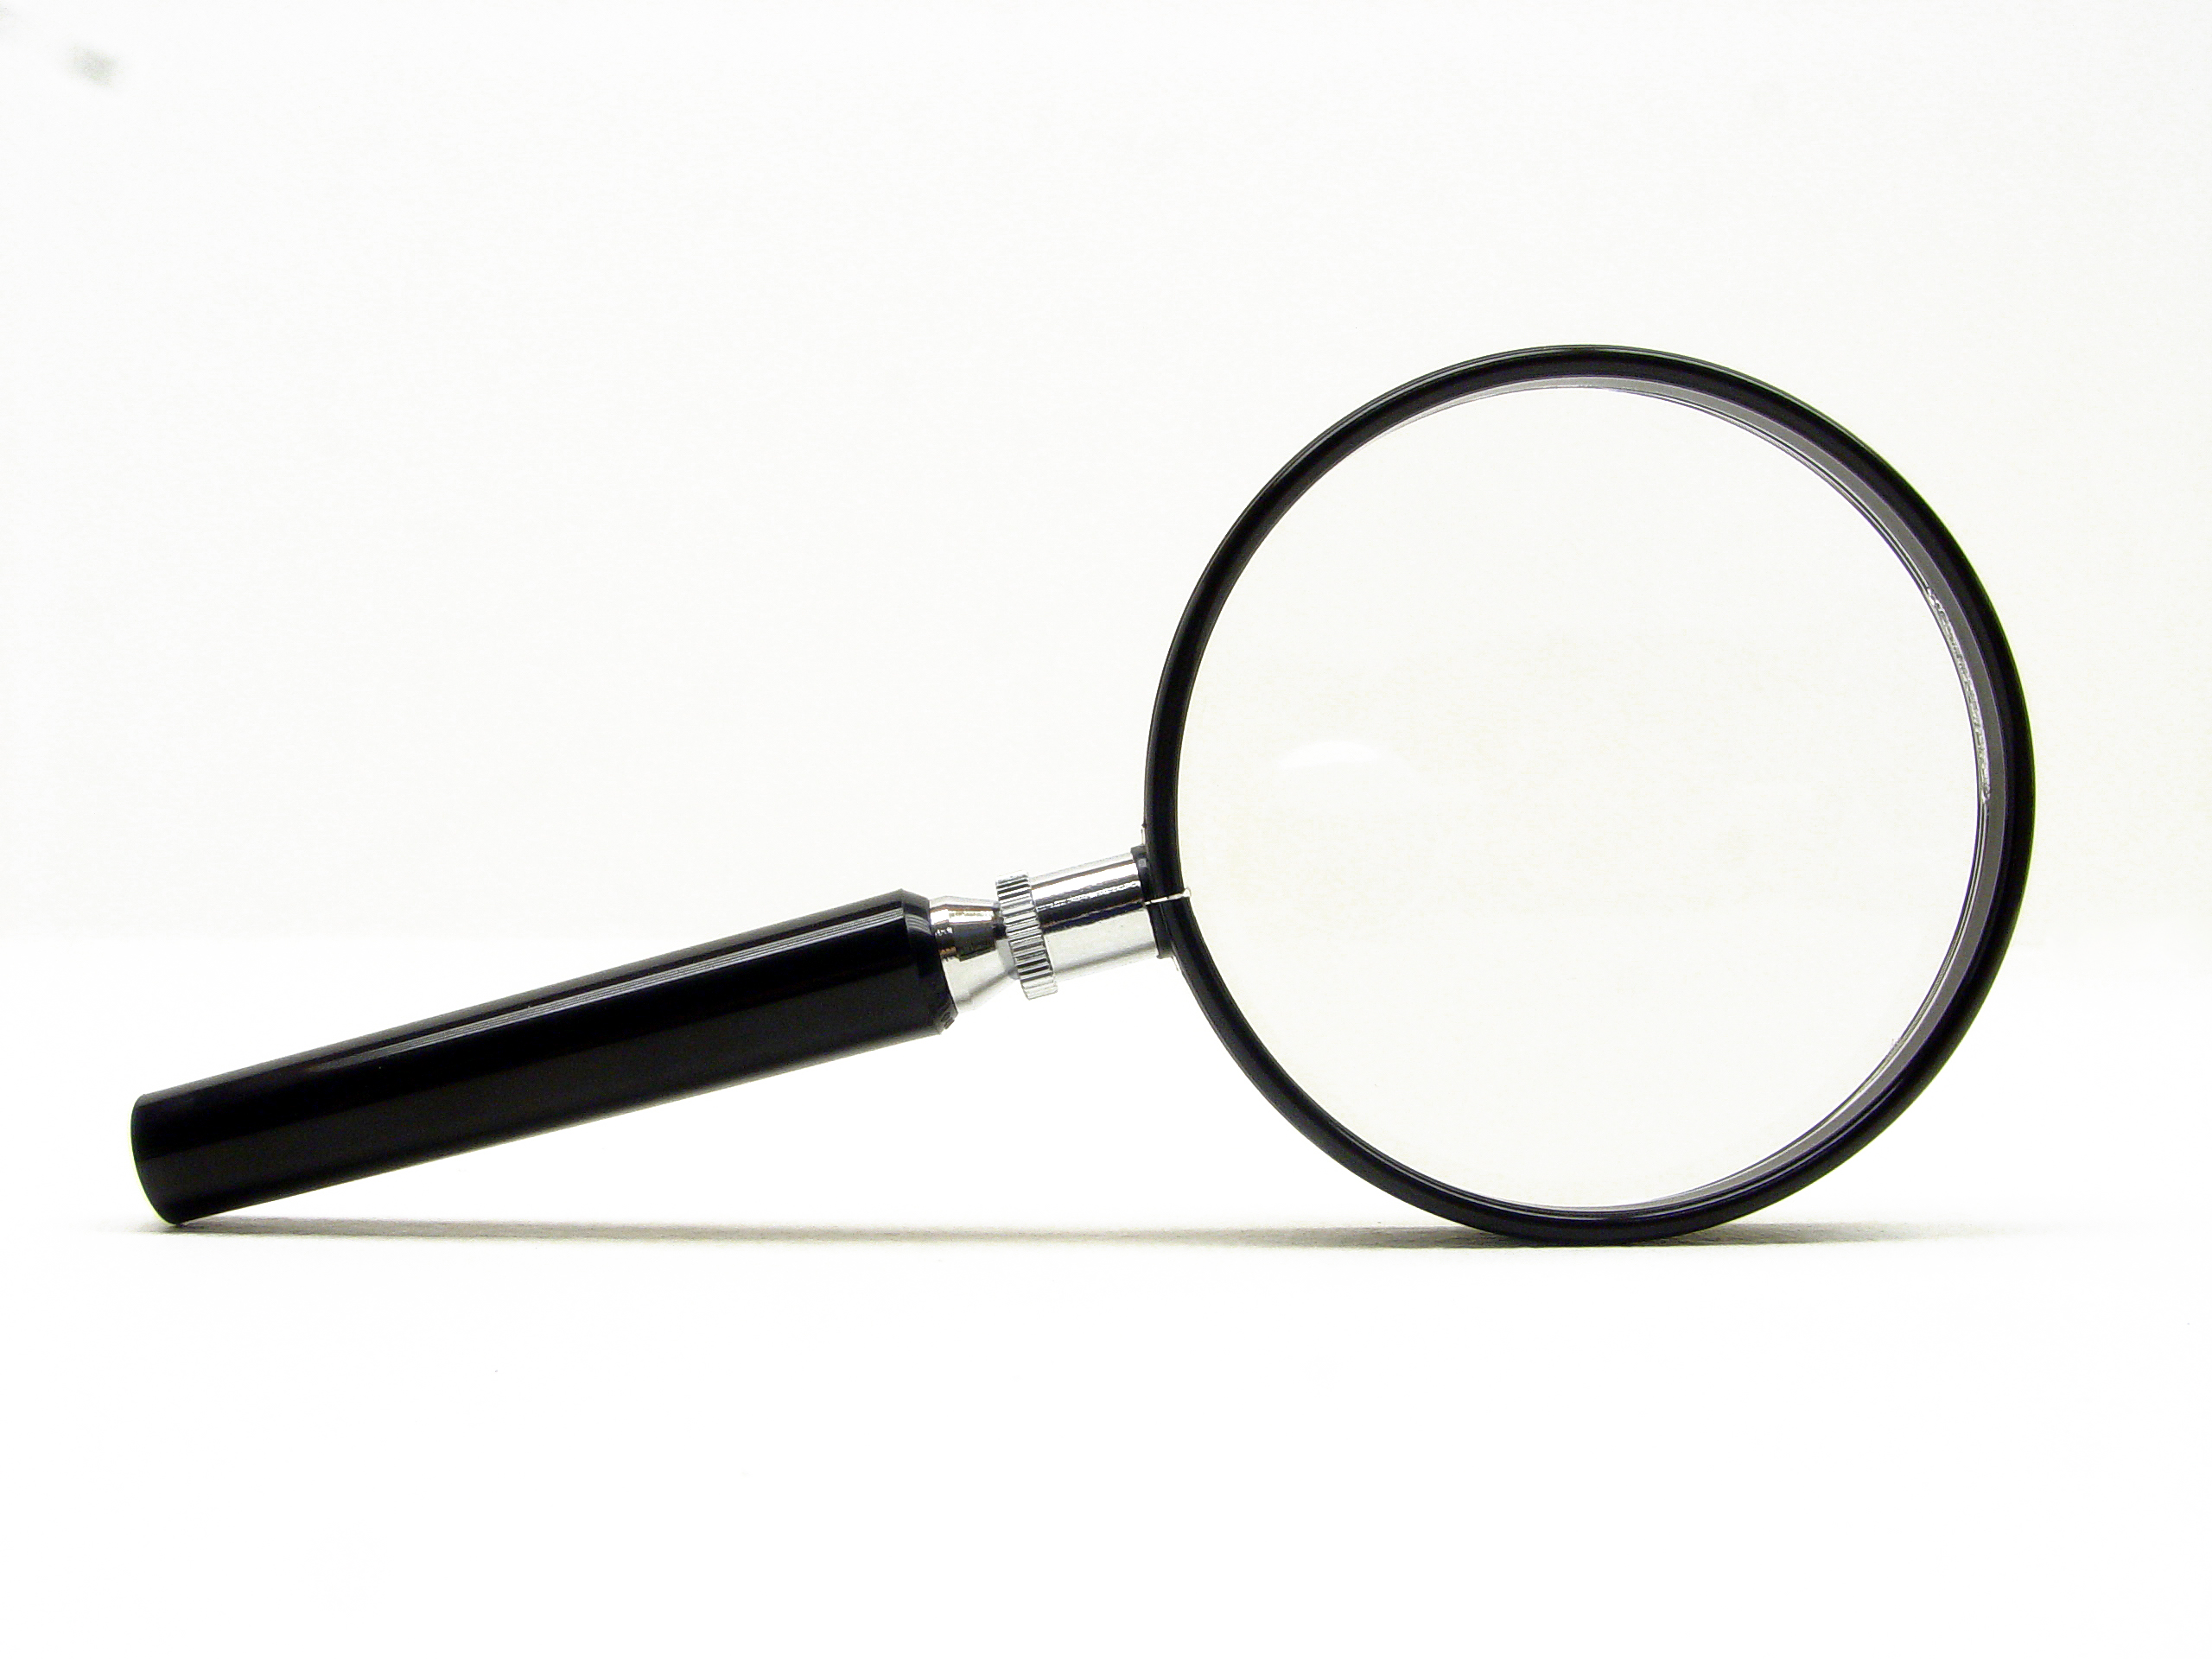 magnifying glass clipart black and white - photo #48